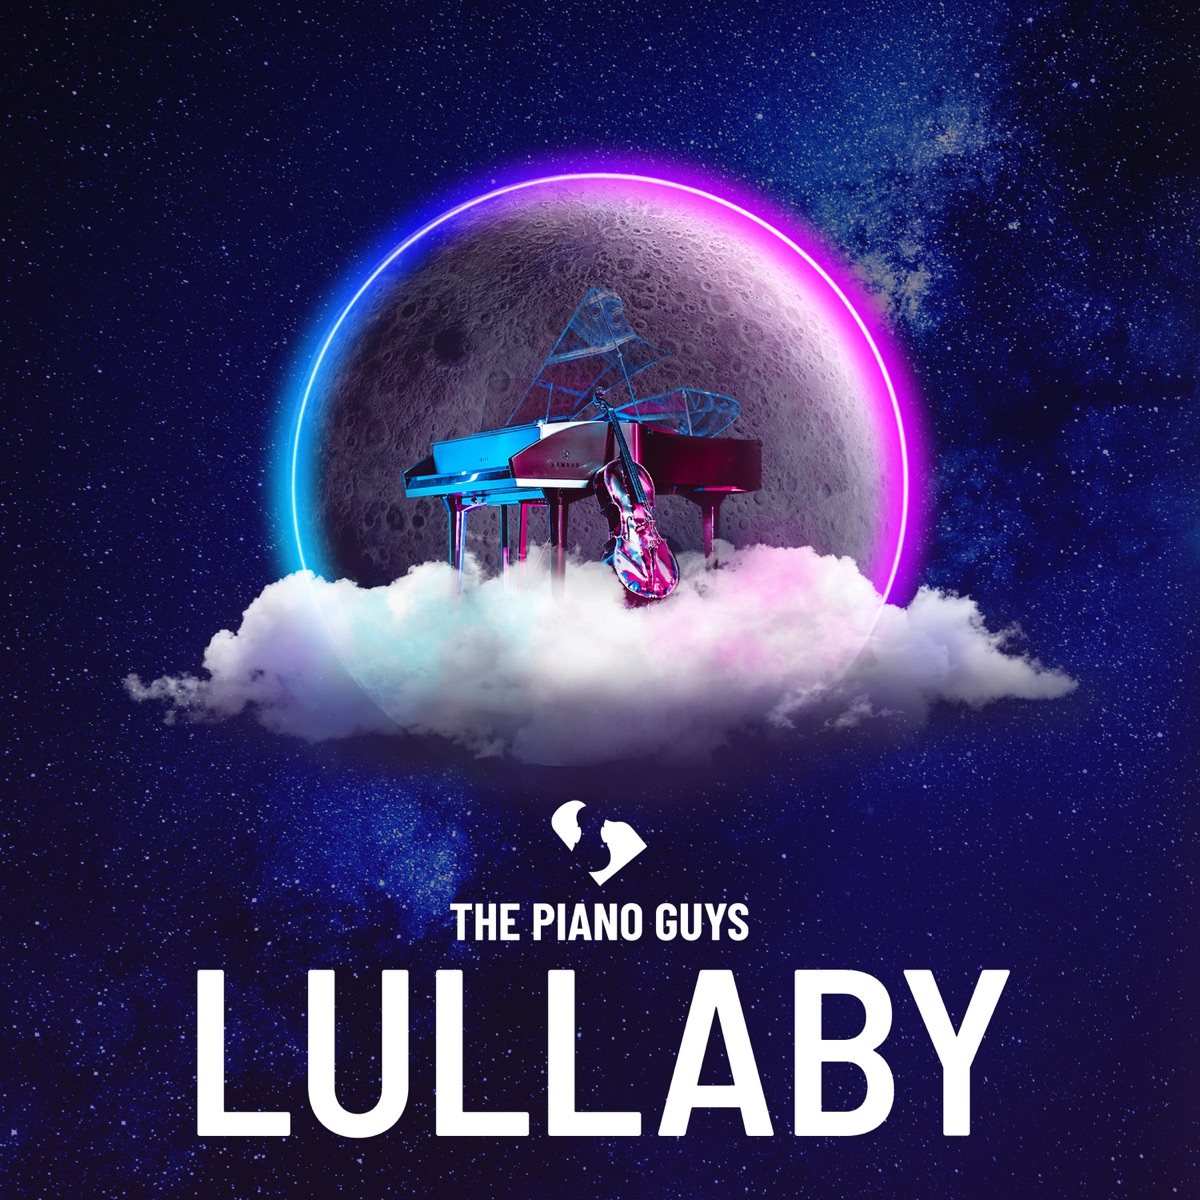 Limitless by The Piano Guys on Apple Music